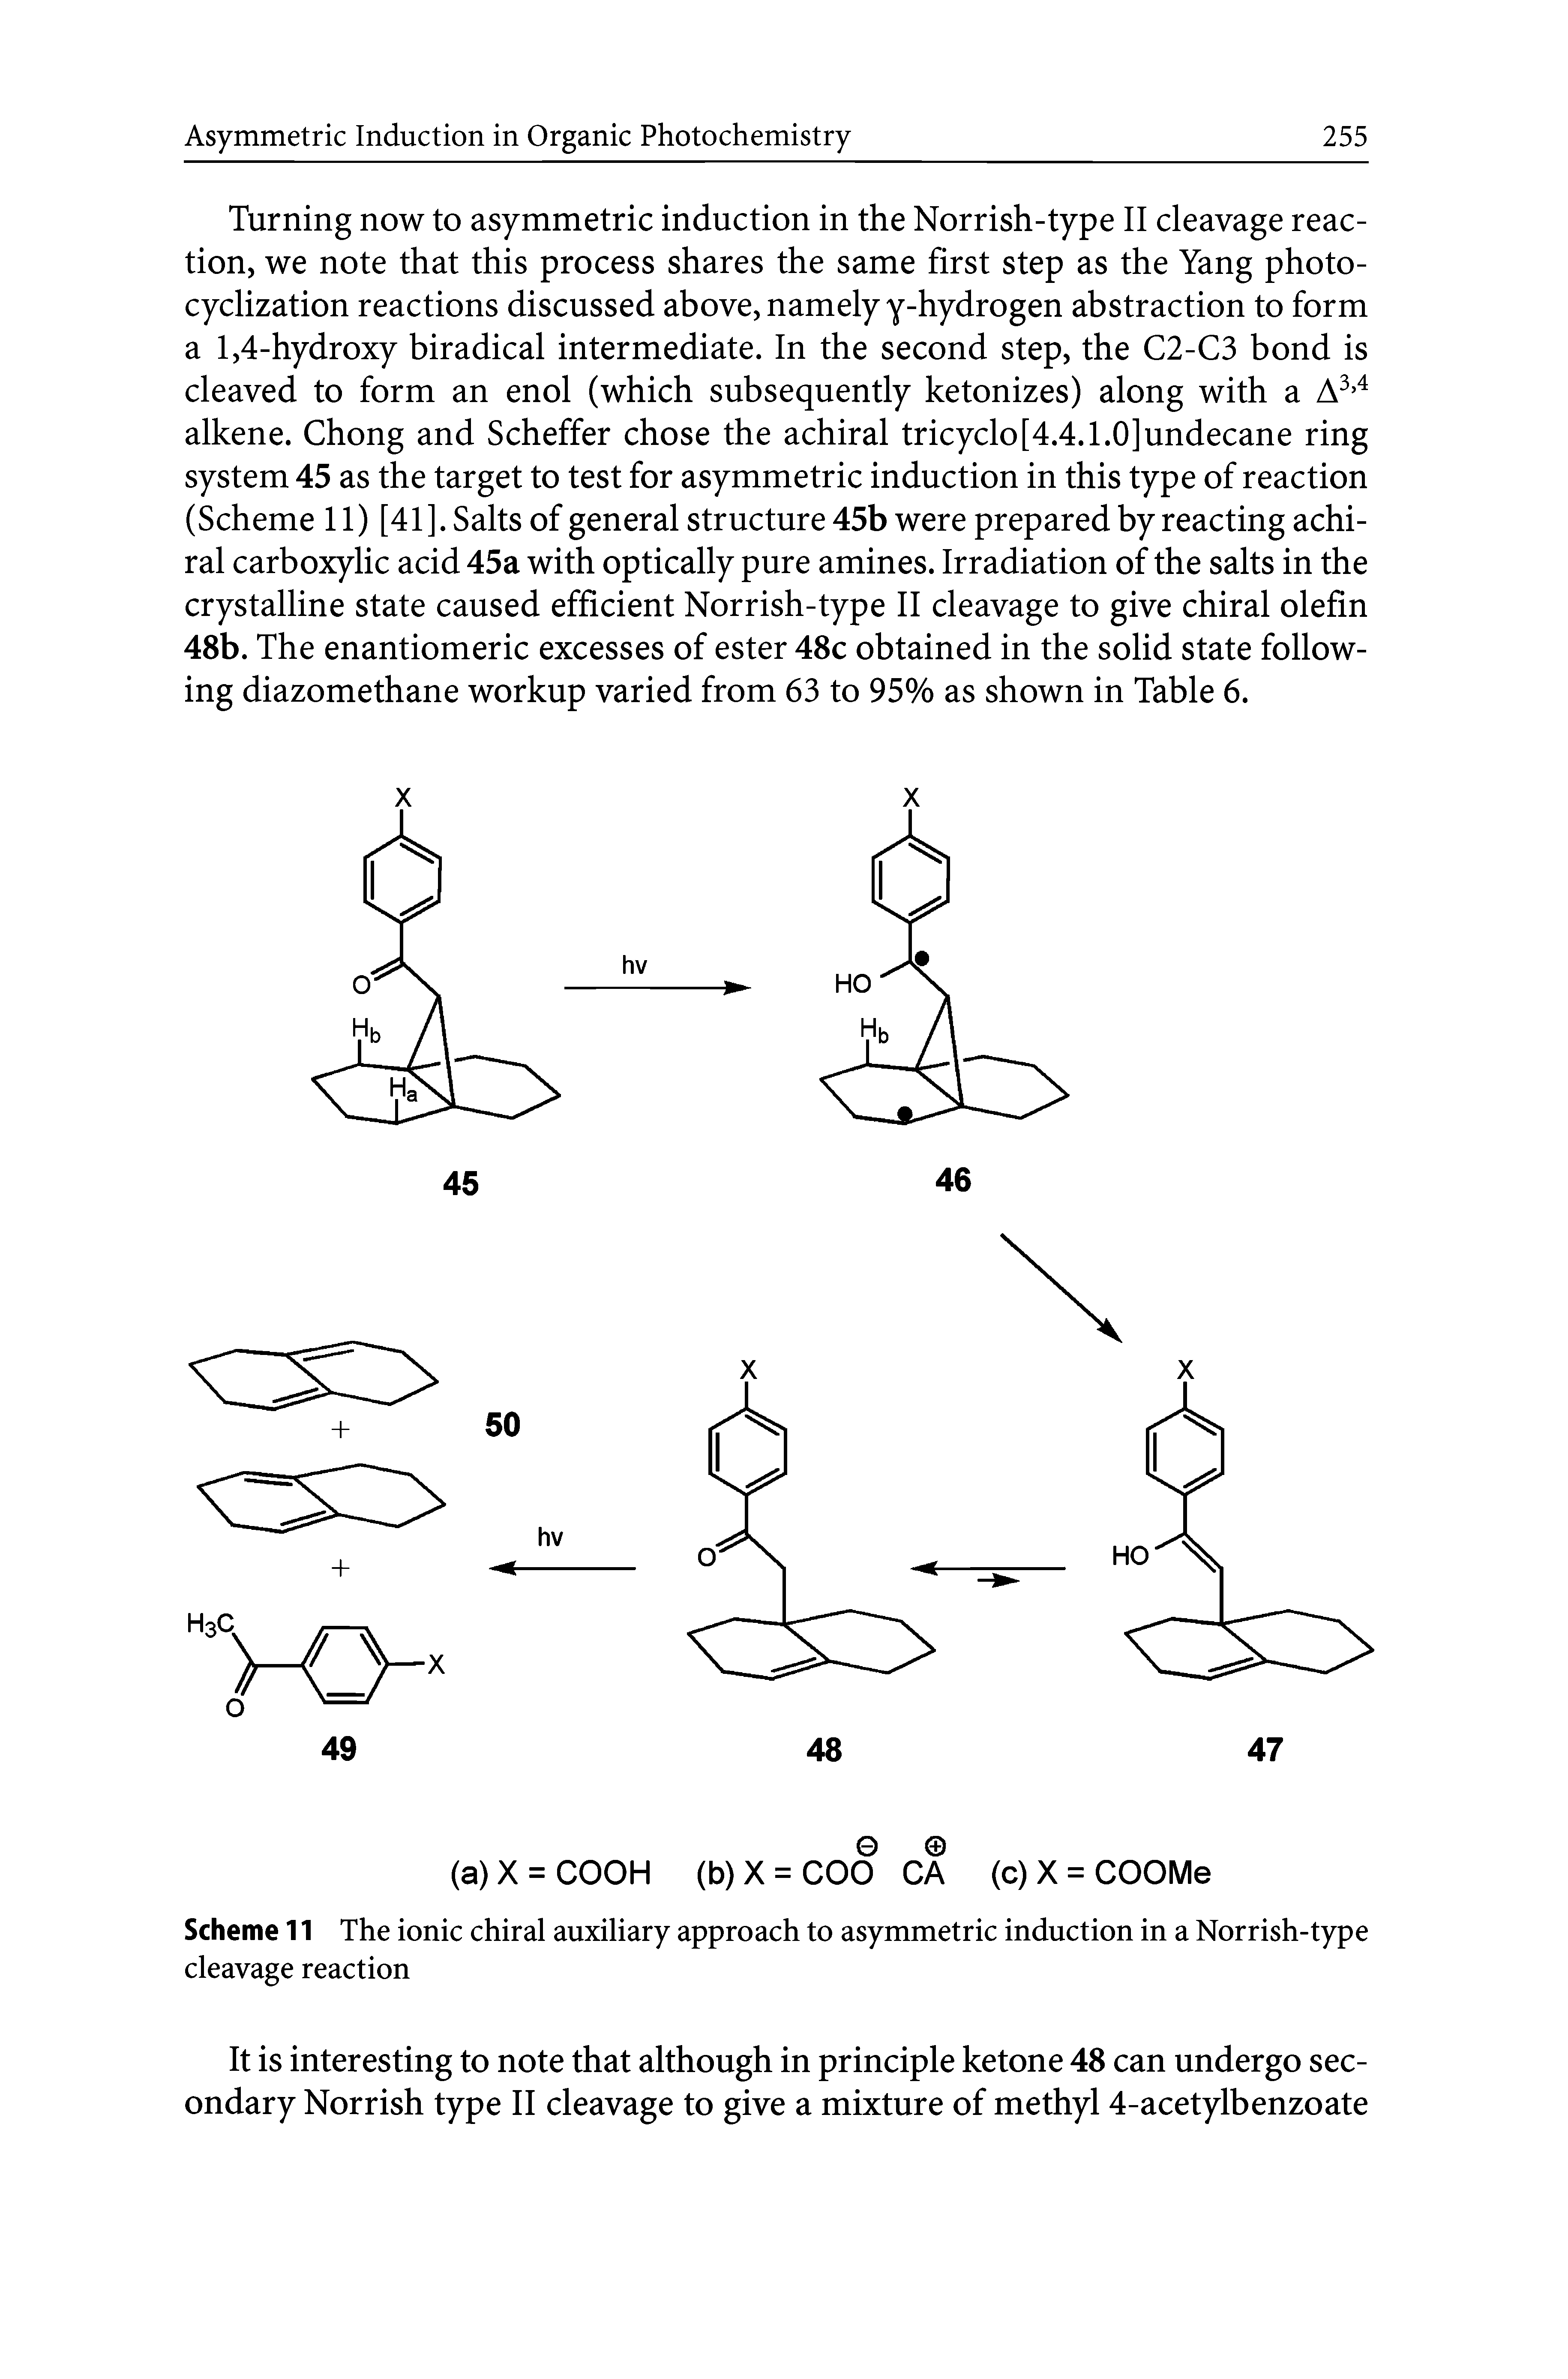 Scheme 11 The ionic chiral auxiliary approach to asymmetric induction in a Norrish-type cleavage reaction...